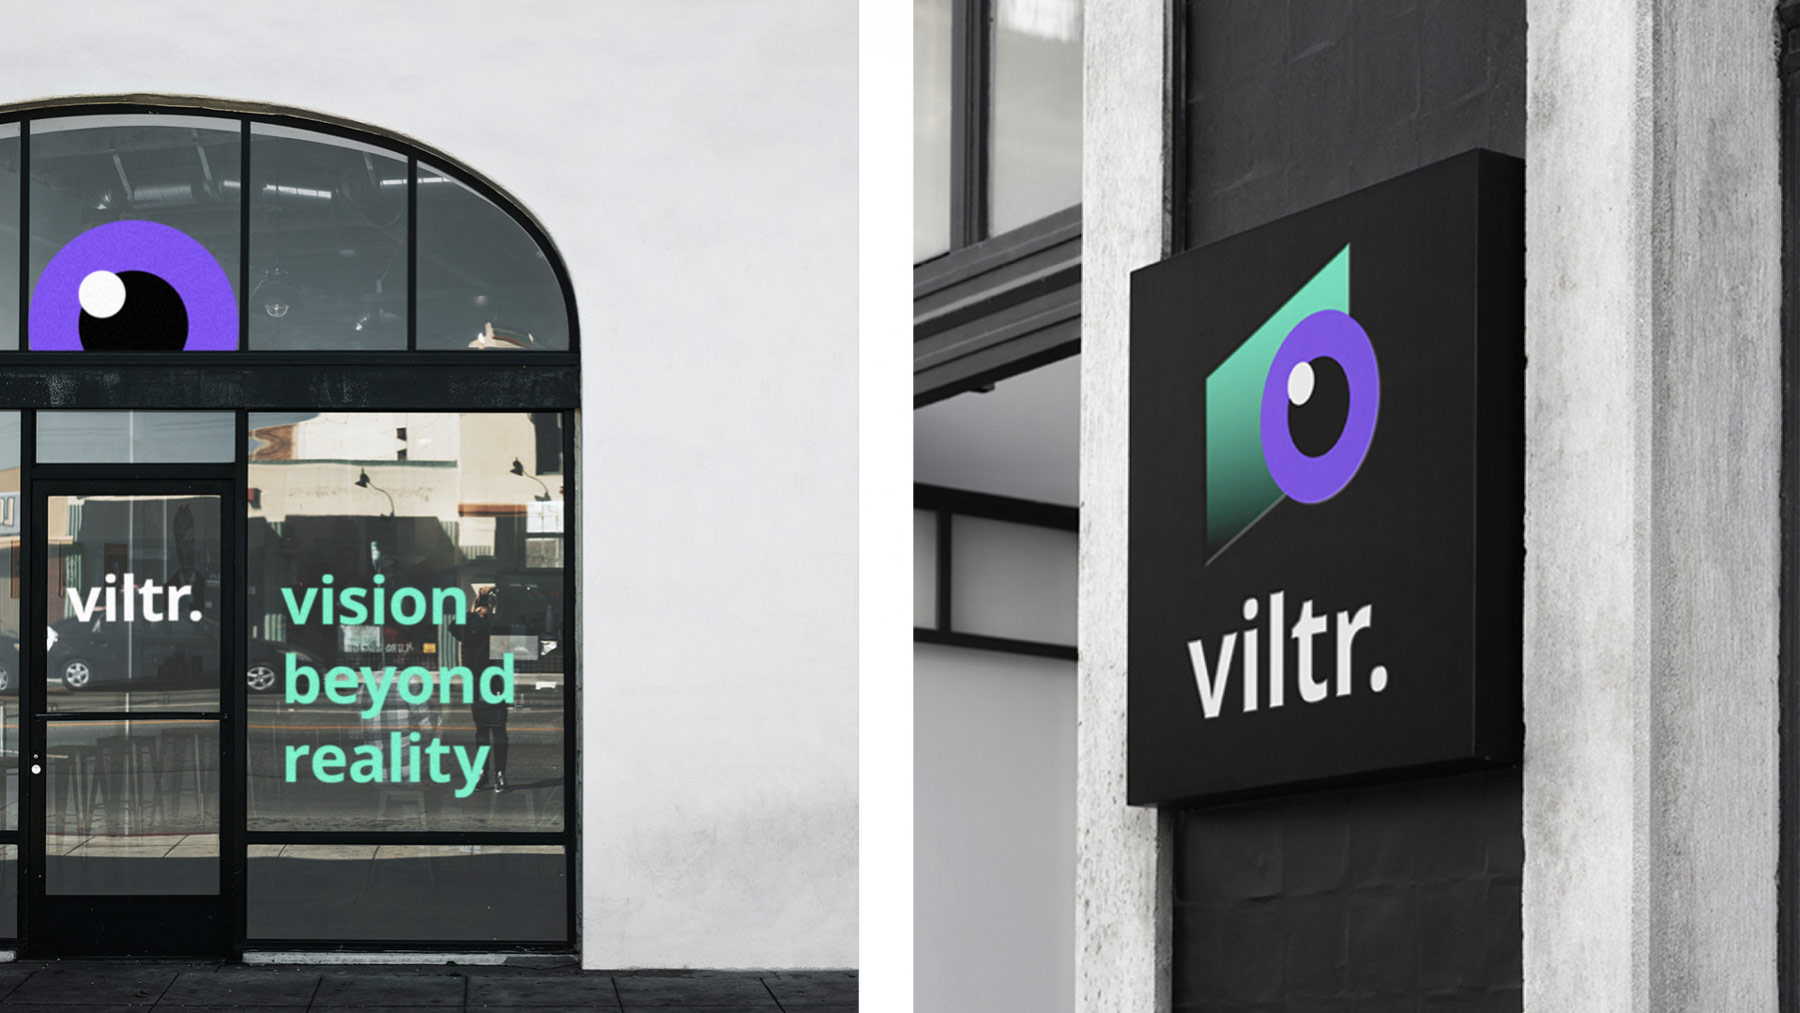 viltr. Store and sign